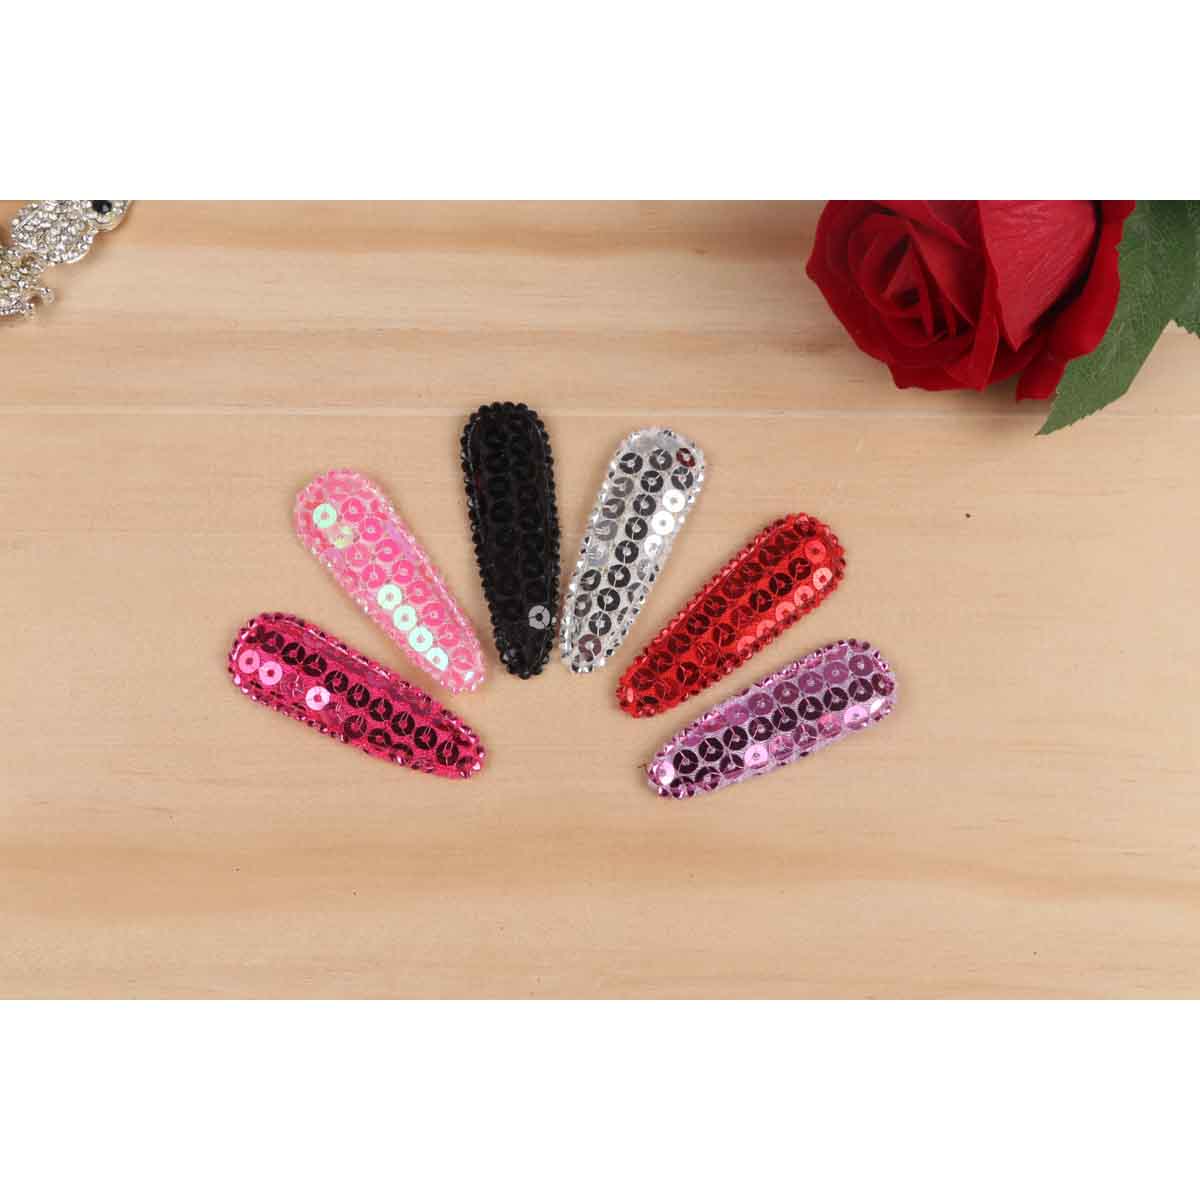 60 Padded Sequin Hair Clip Covers 55mm-6 Colors